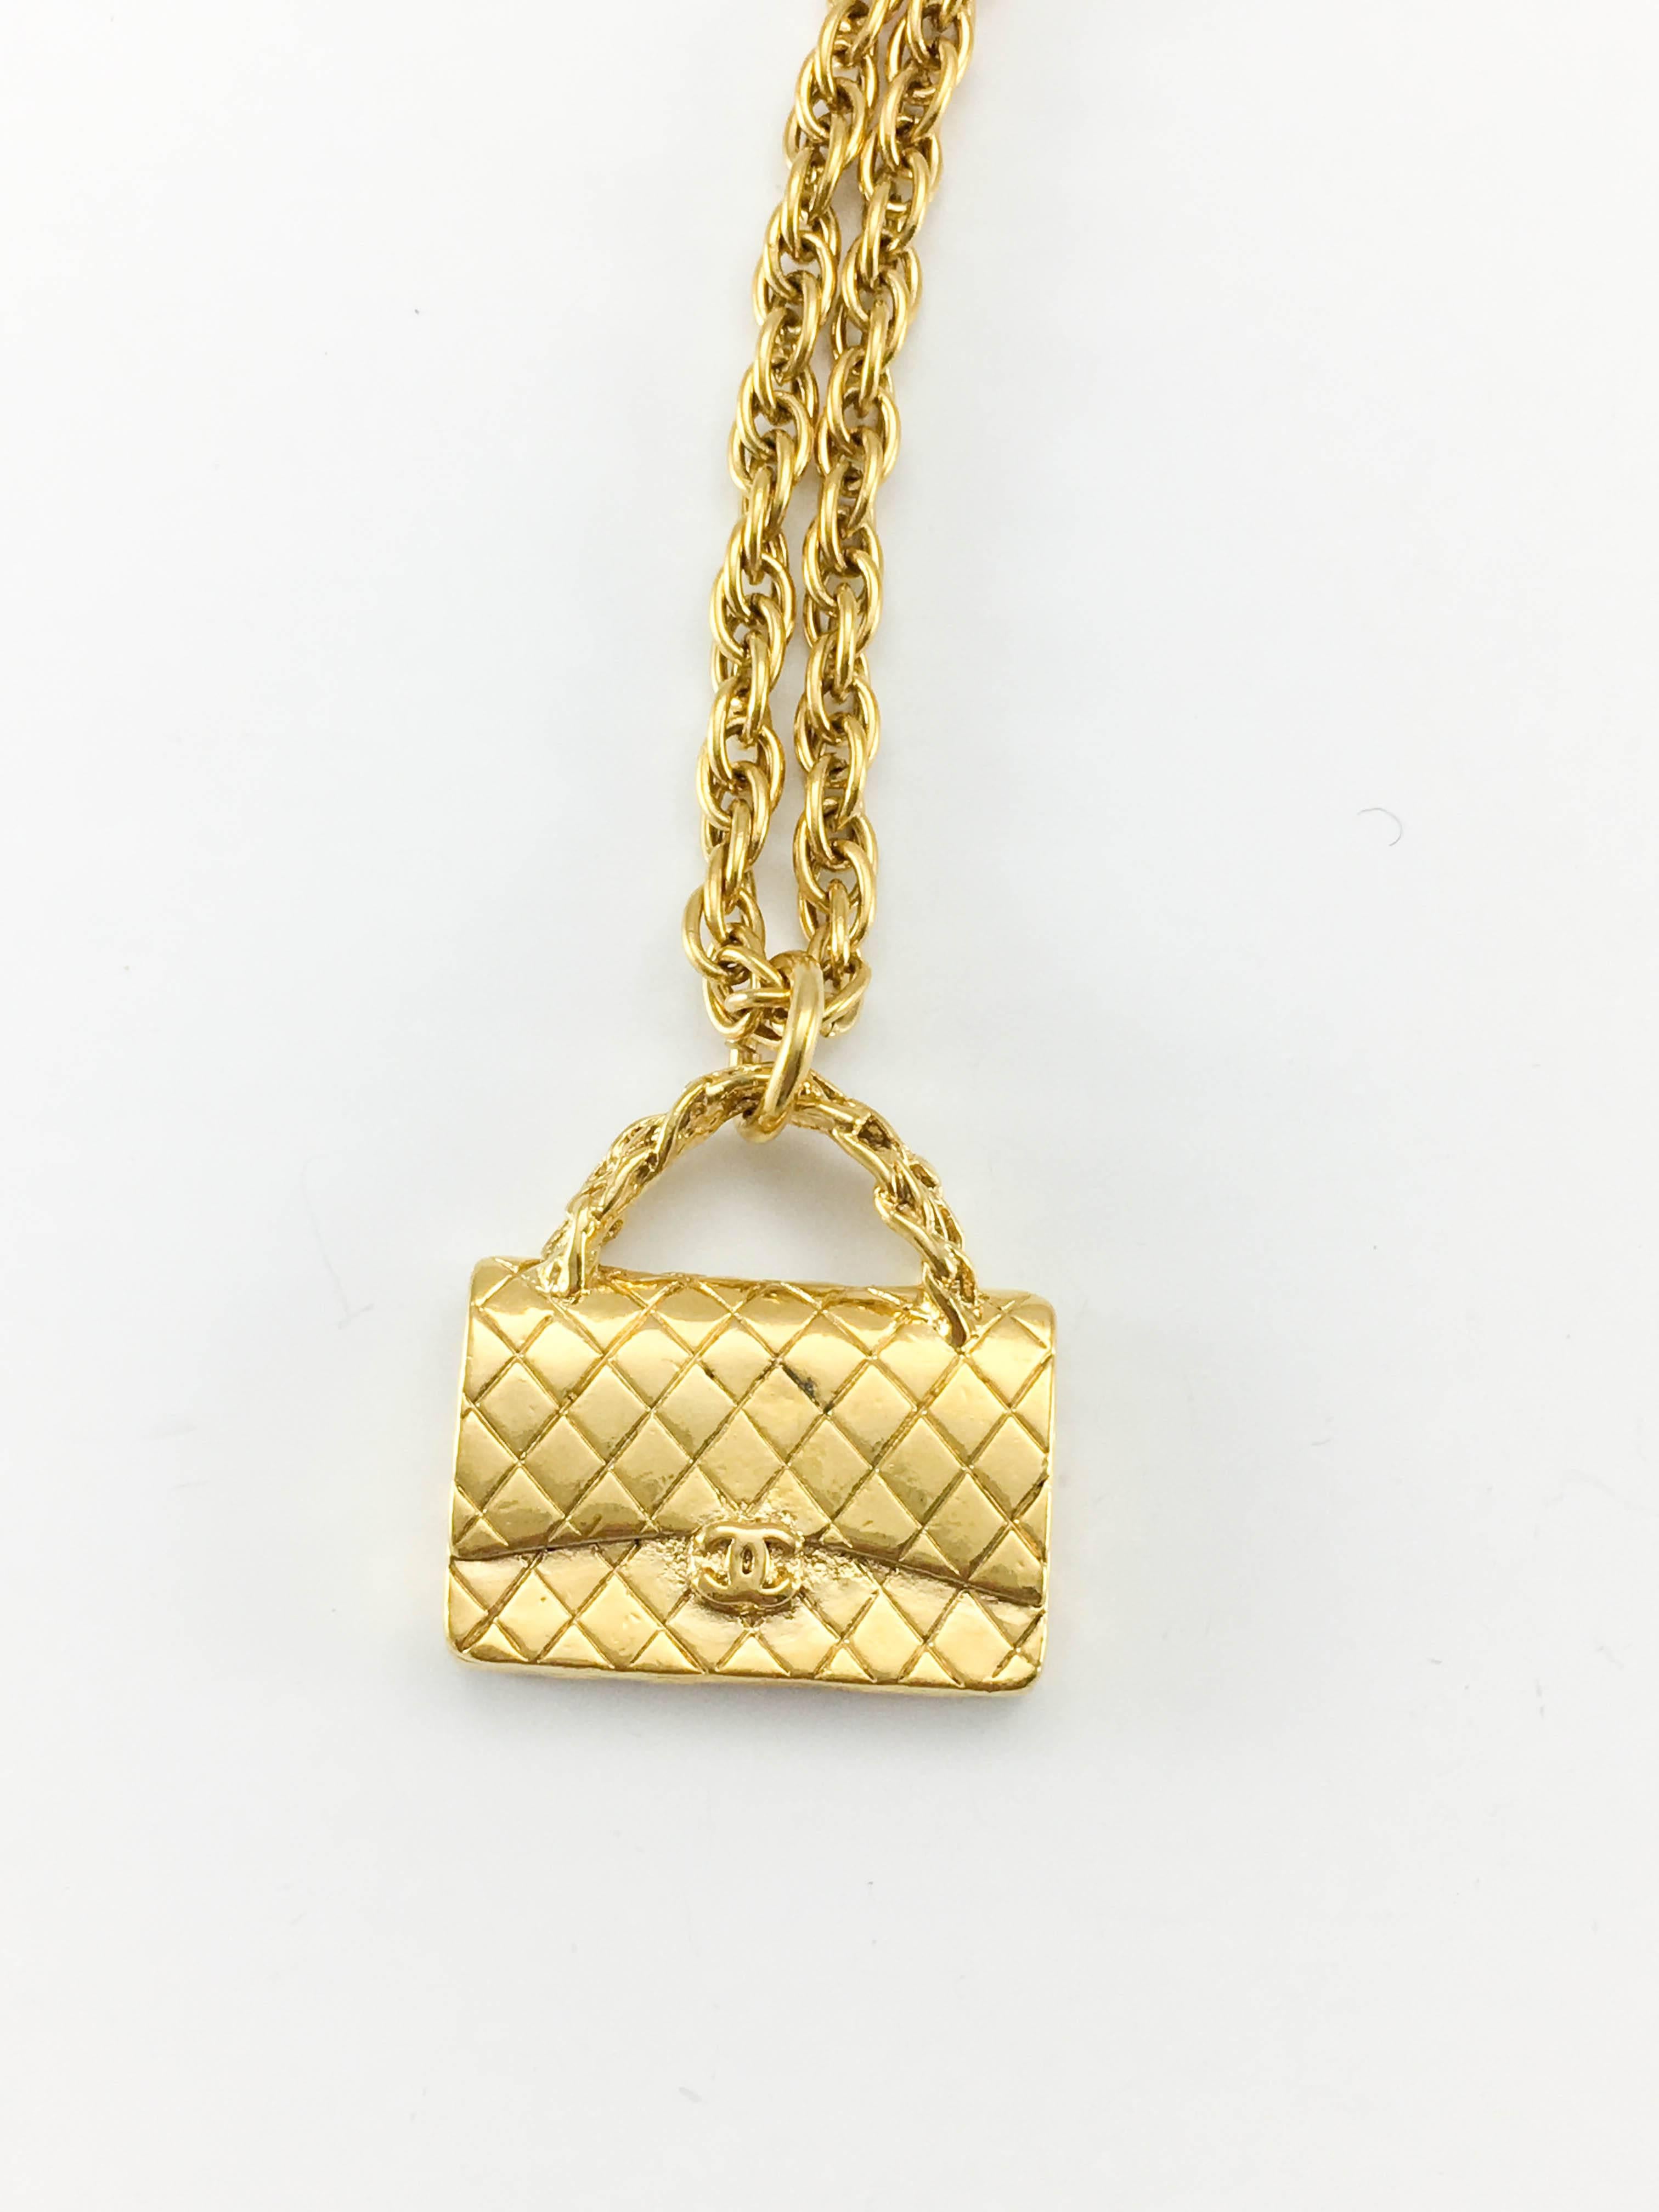 1994 Chanel Gold-Plated 2.55 Quilted Handbag Pendant Necklace For Sale 1